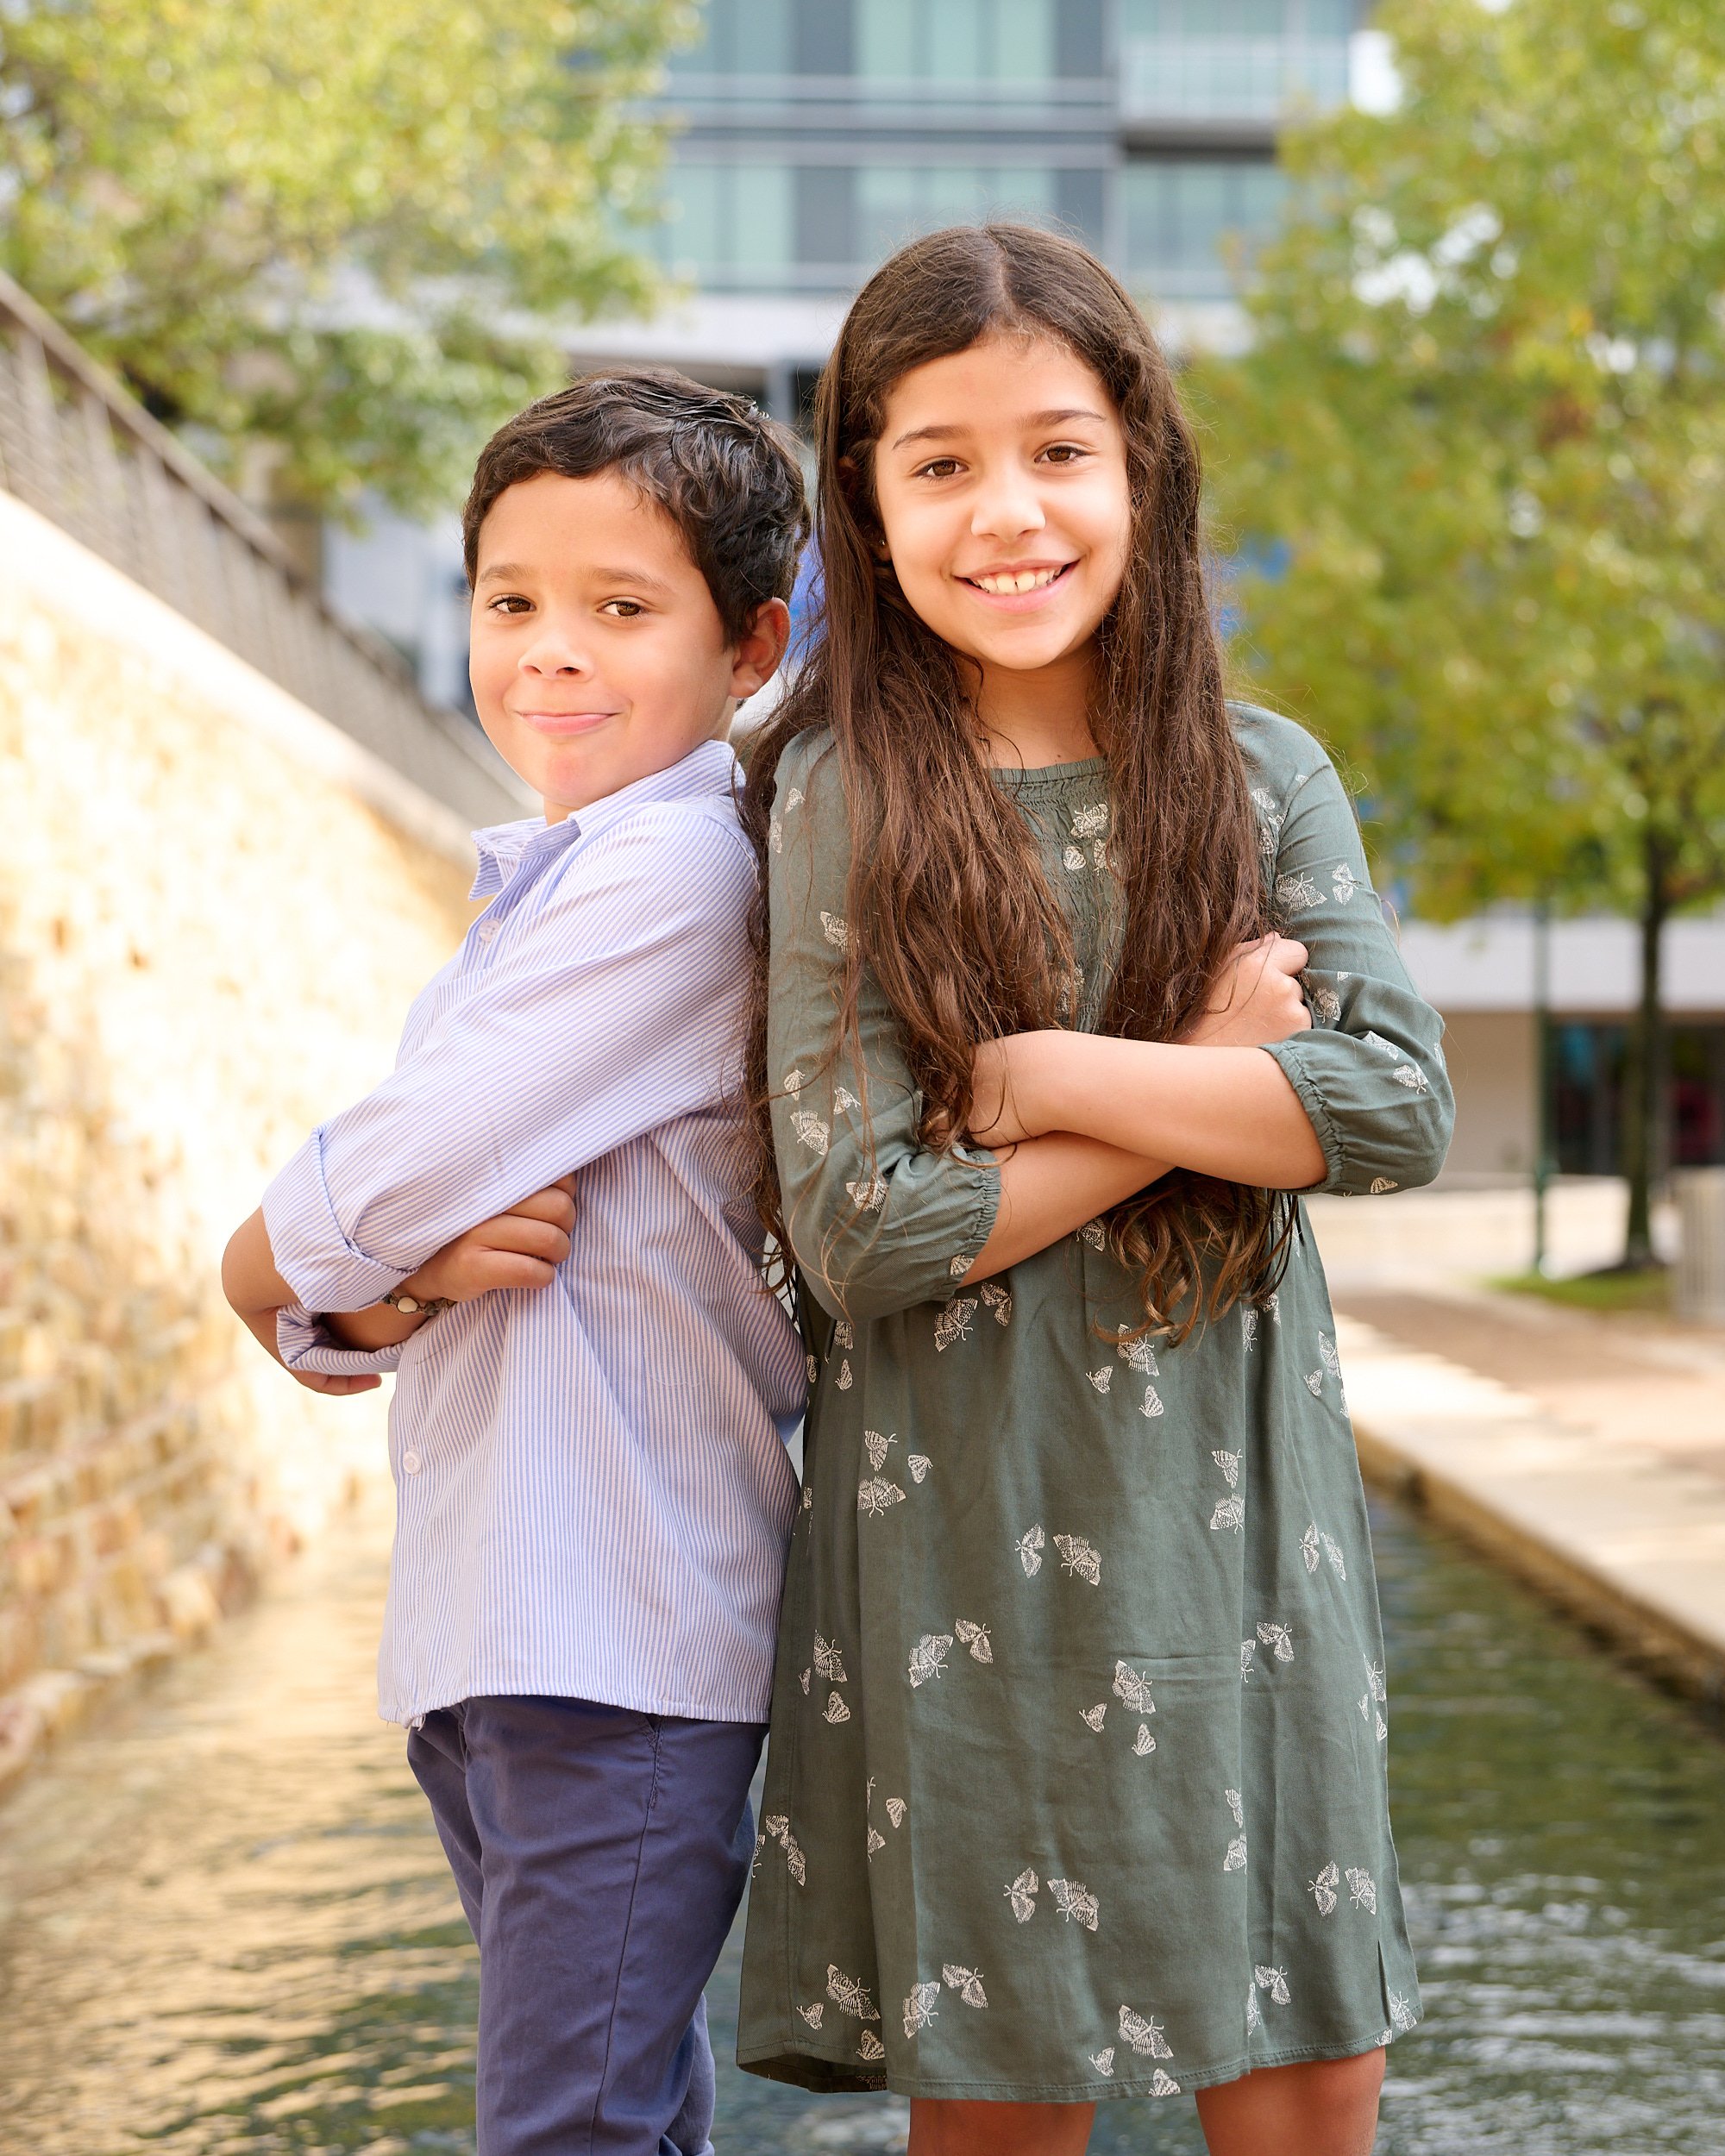  THE WOODLANDS, TEXAS - DECEMBER 2022: photo session in the Woodlands Waterway Square. Jayme Meyer’s two children are posing for family portraits. The young brother and sister are smiling playfully. 